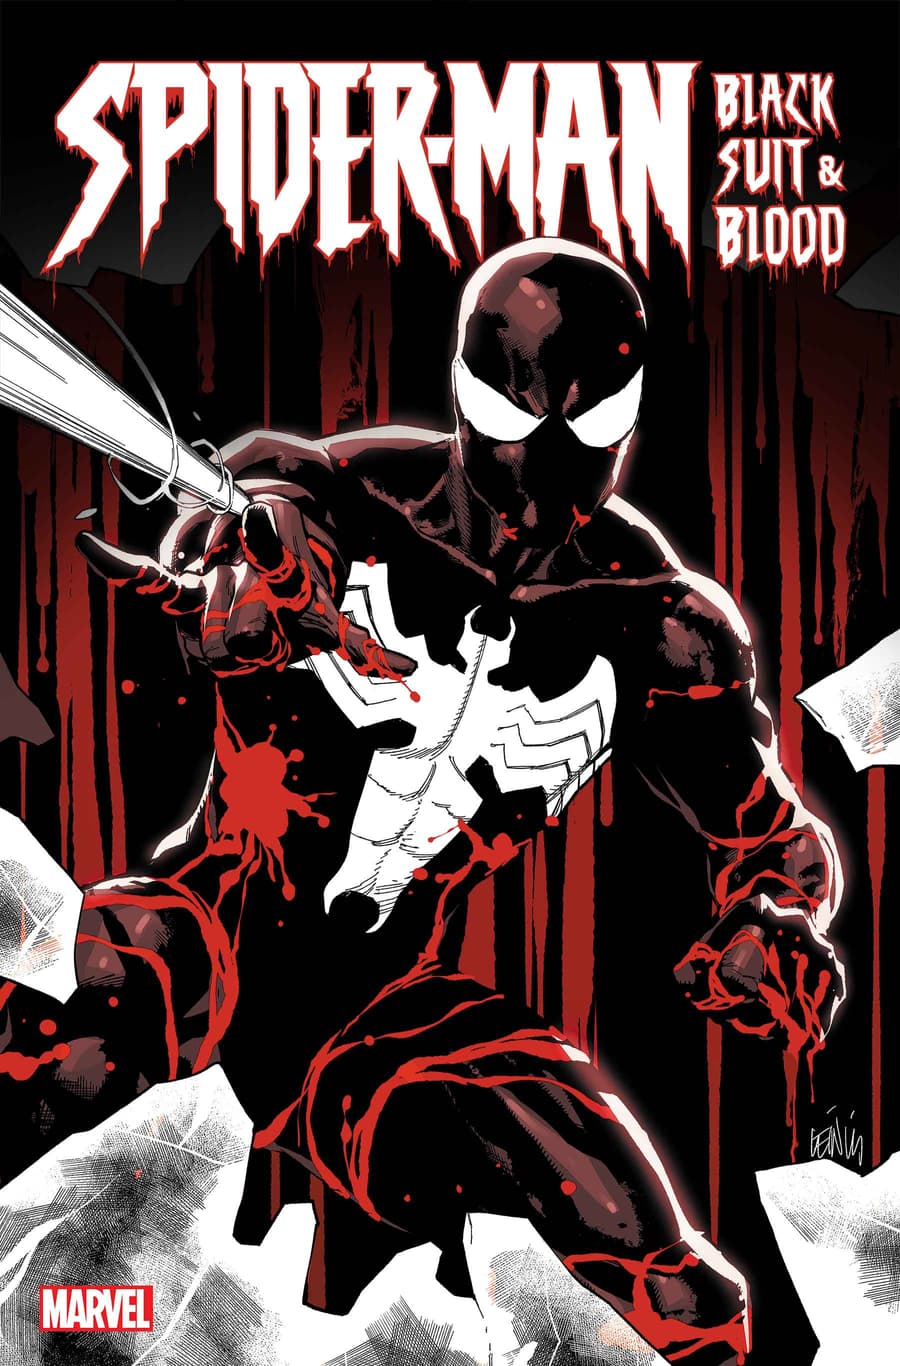 SPIDER-MAN: BLACK SUIT & BLOOD #1 cover by Leinil Francis Yu